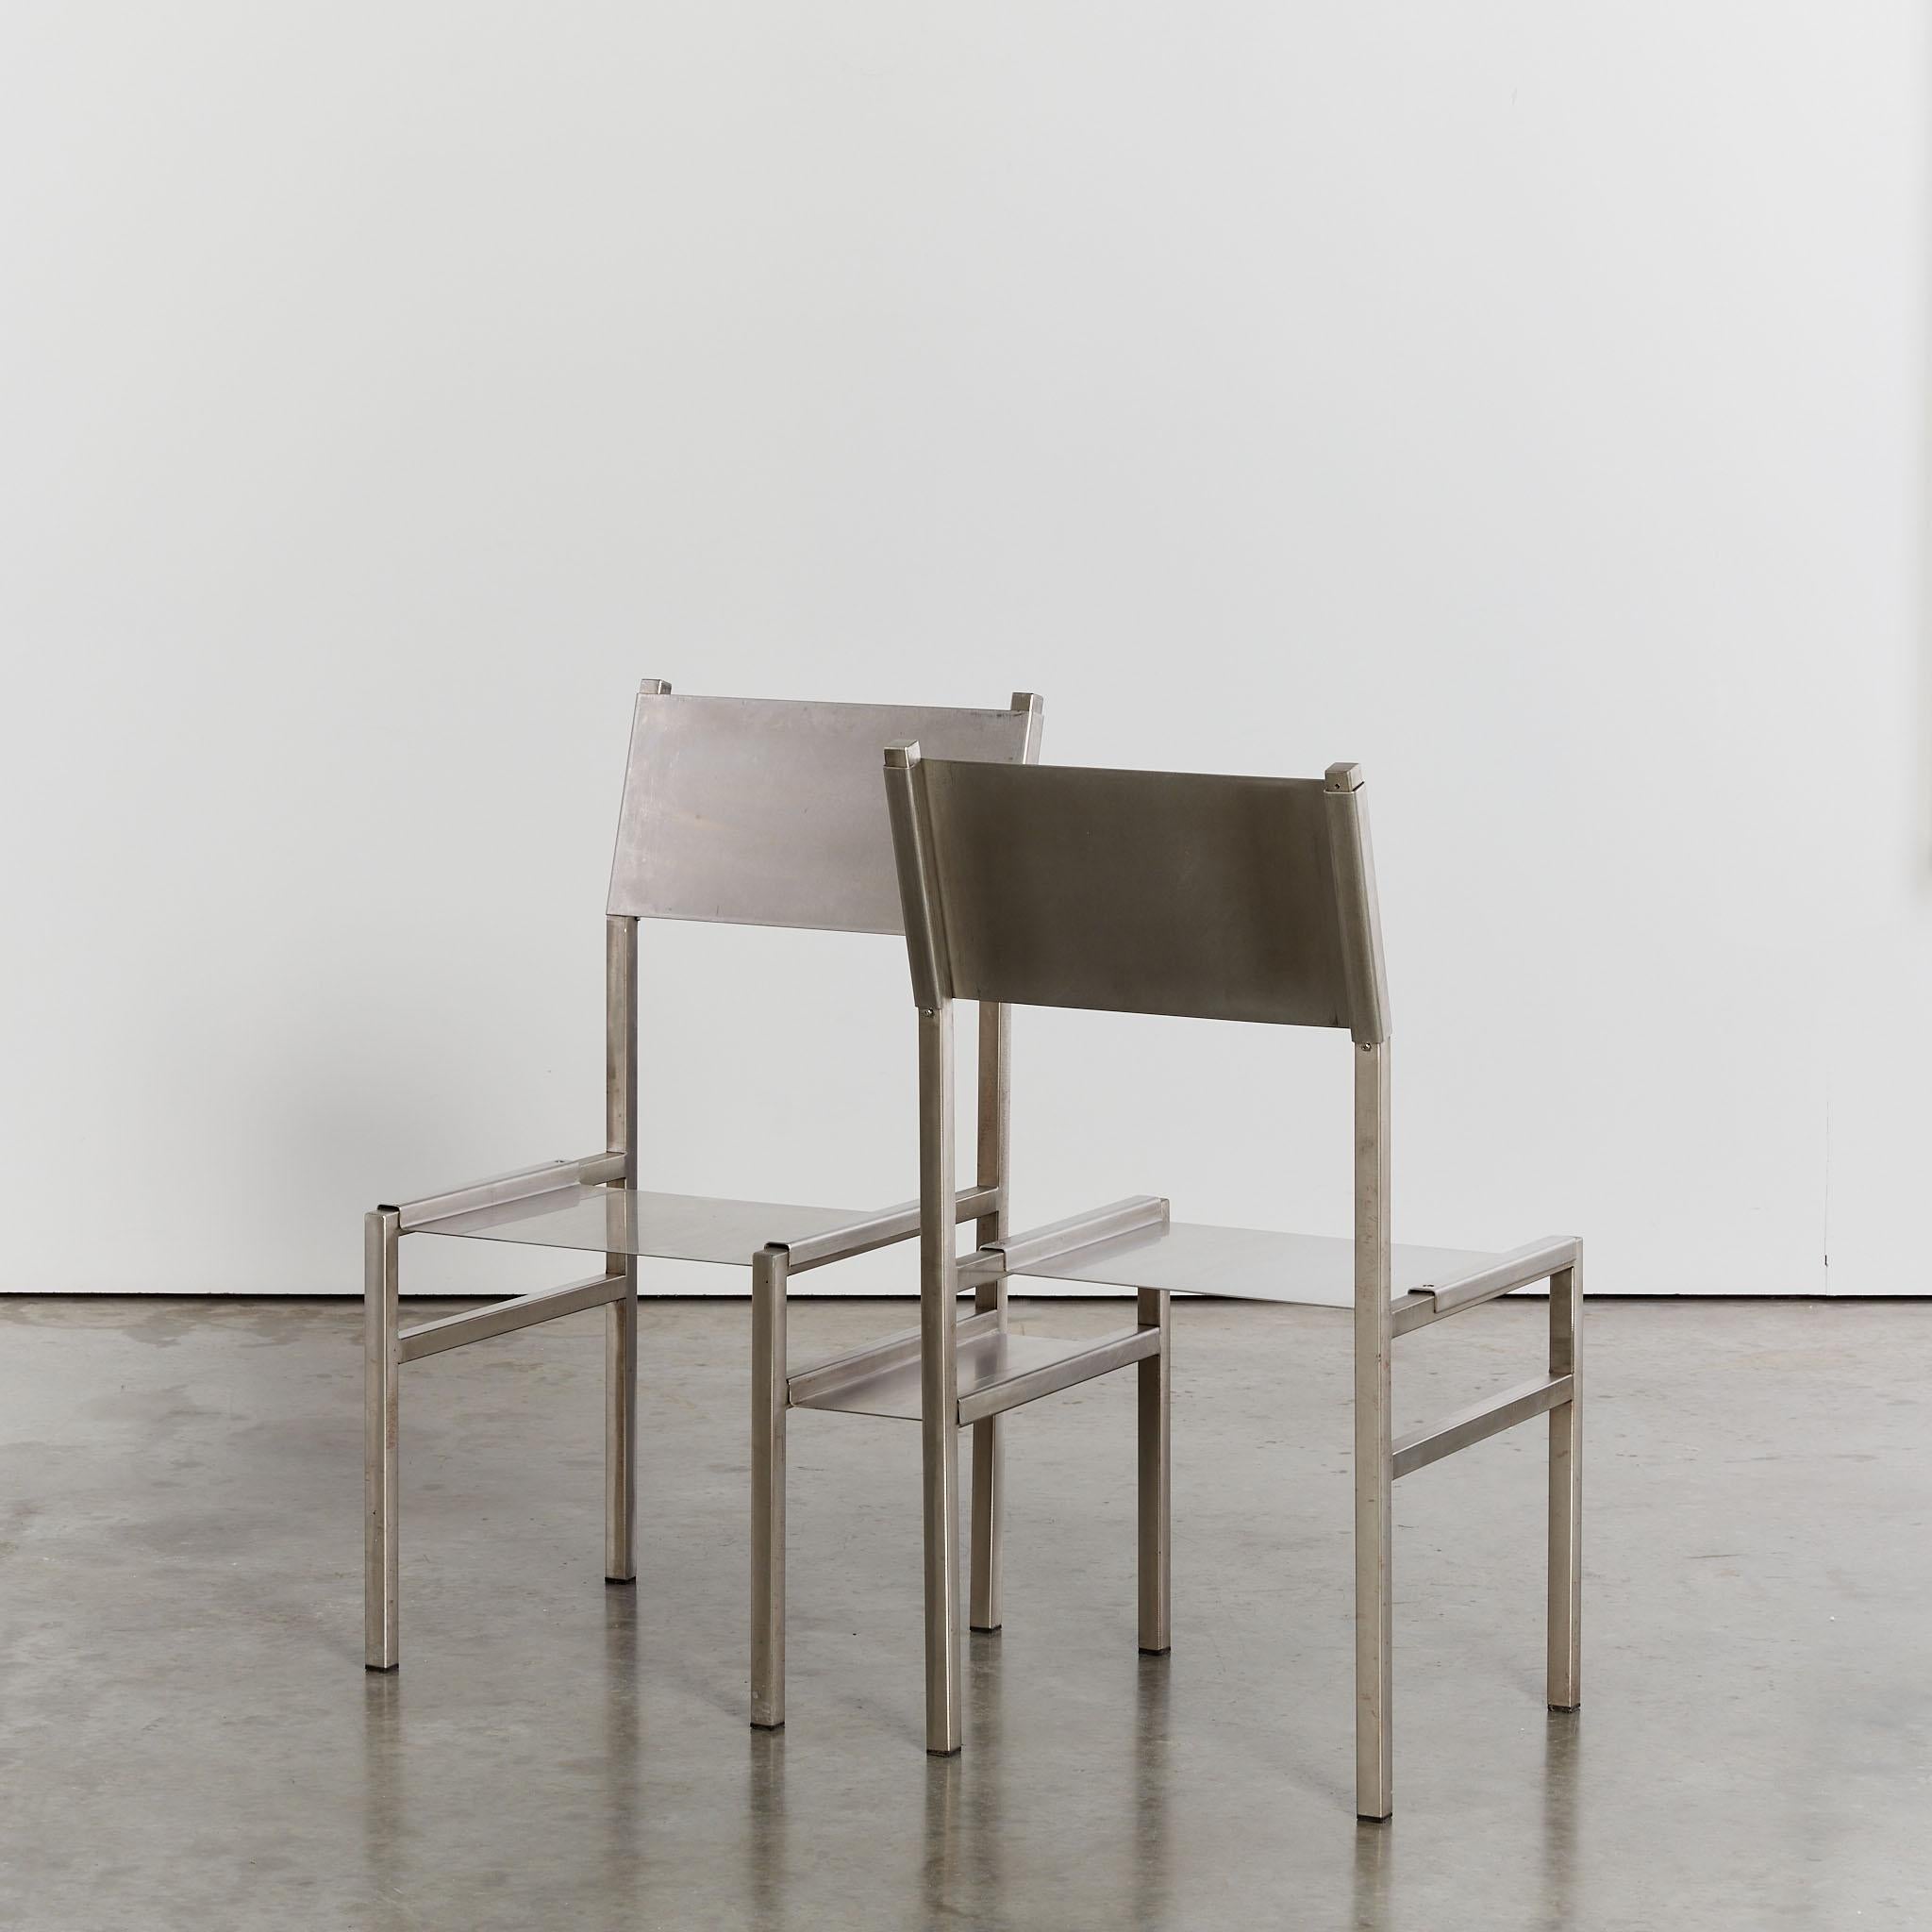 Stainless steel post modern Plug-in loveseat by Christop Siebrasse, edition of 6 For Sale 2